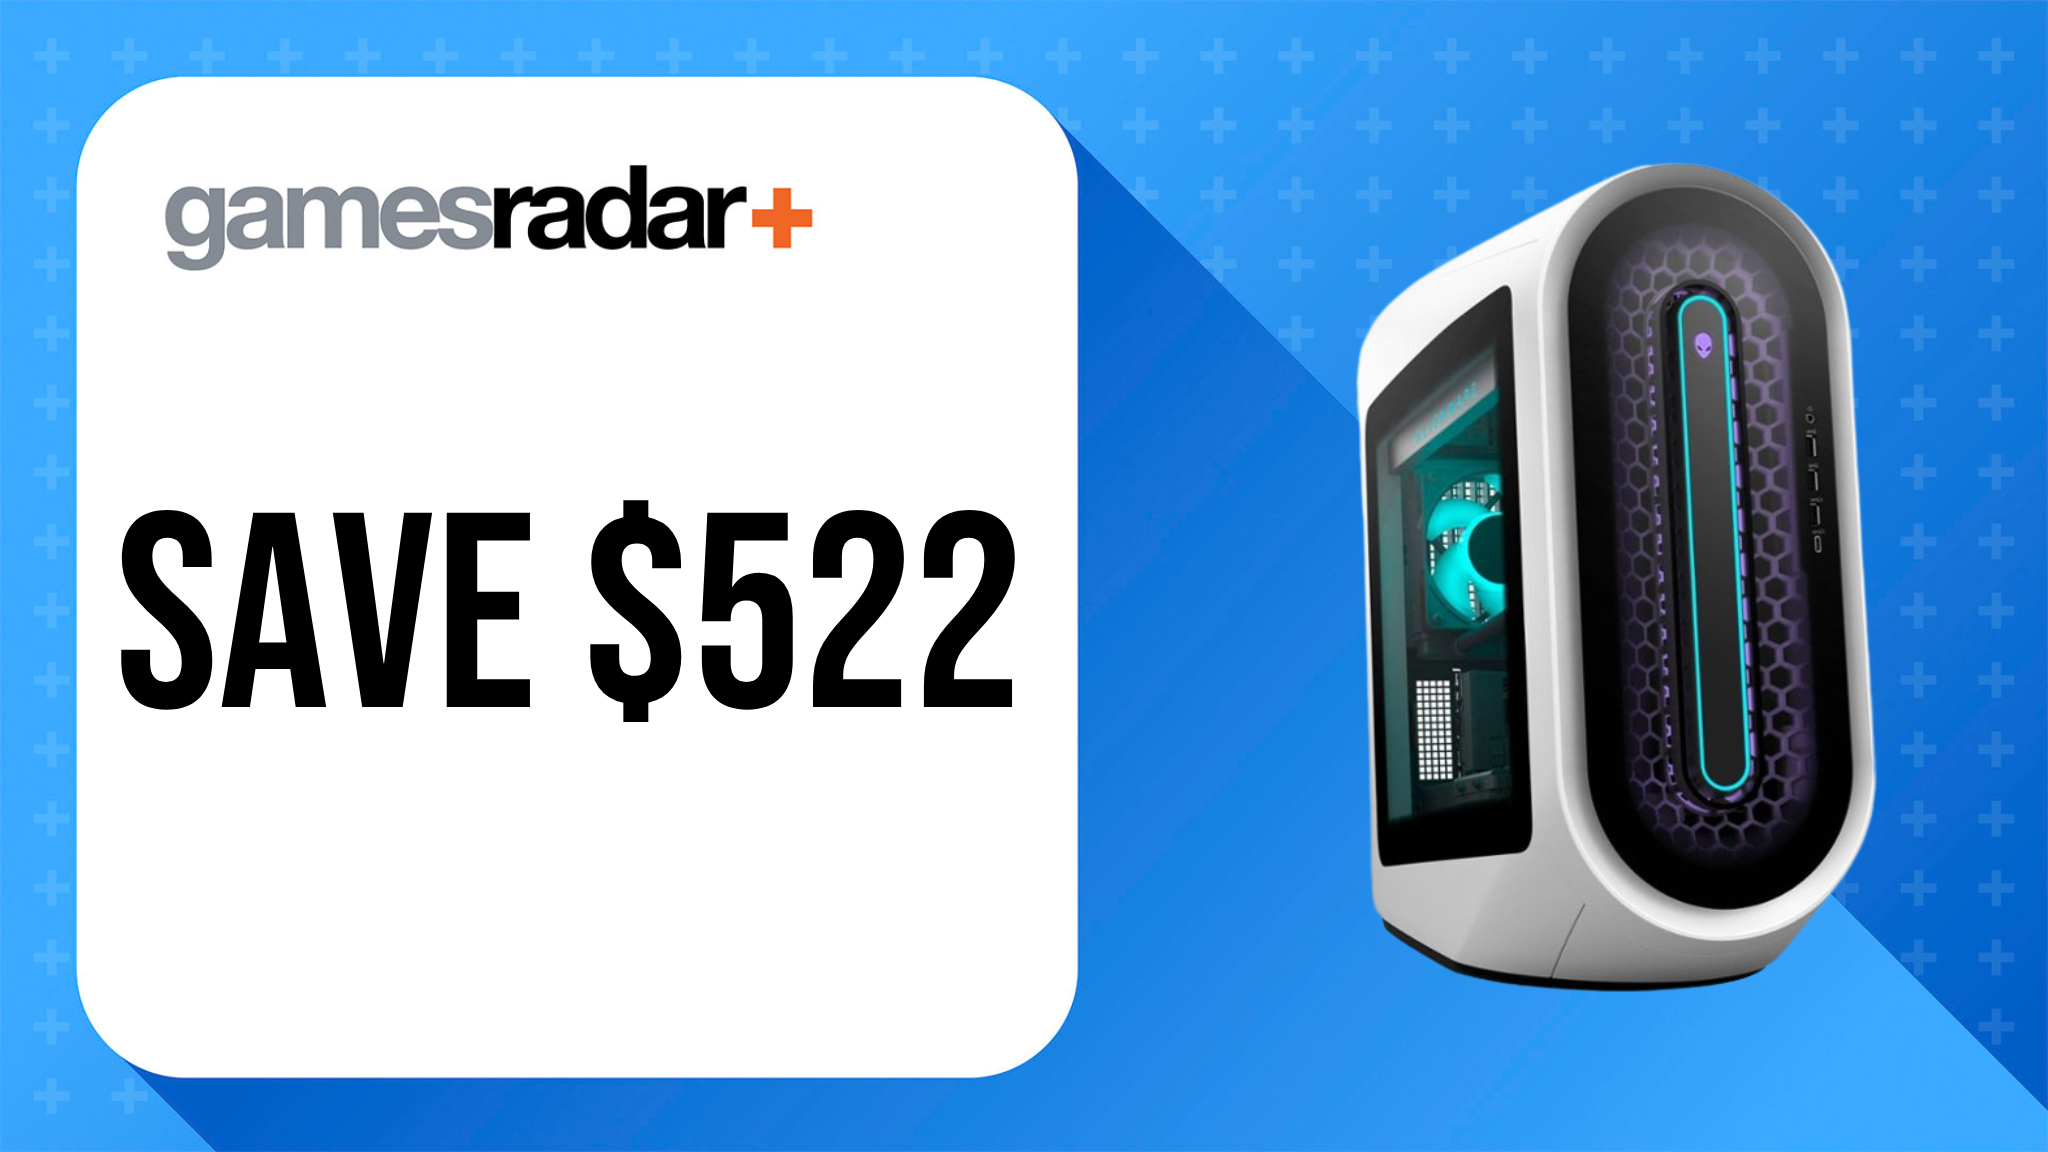 Alienware Aurora R13 deal image with blue background and $522 saving stamp